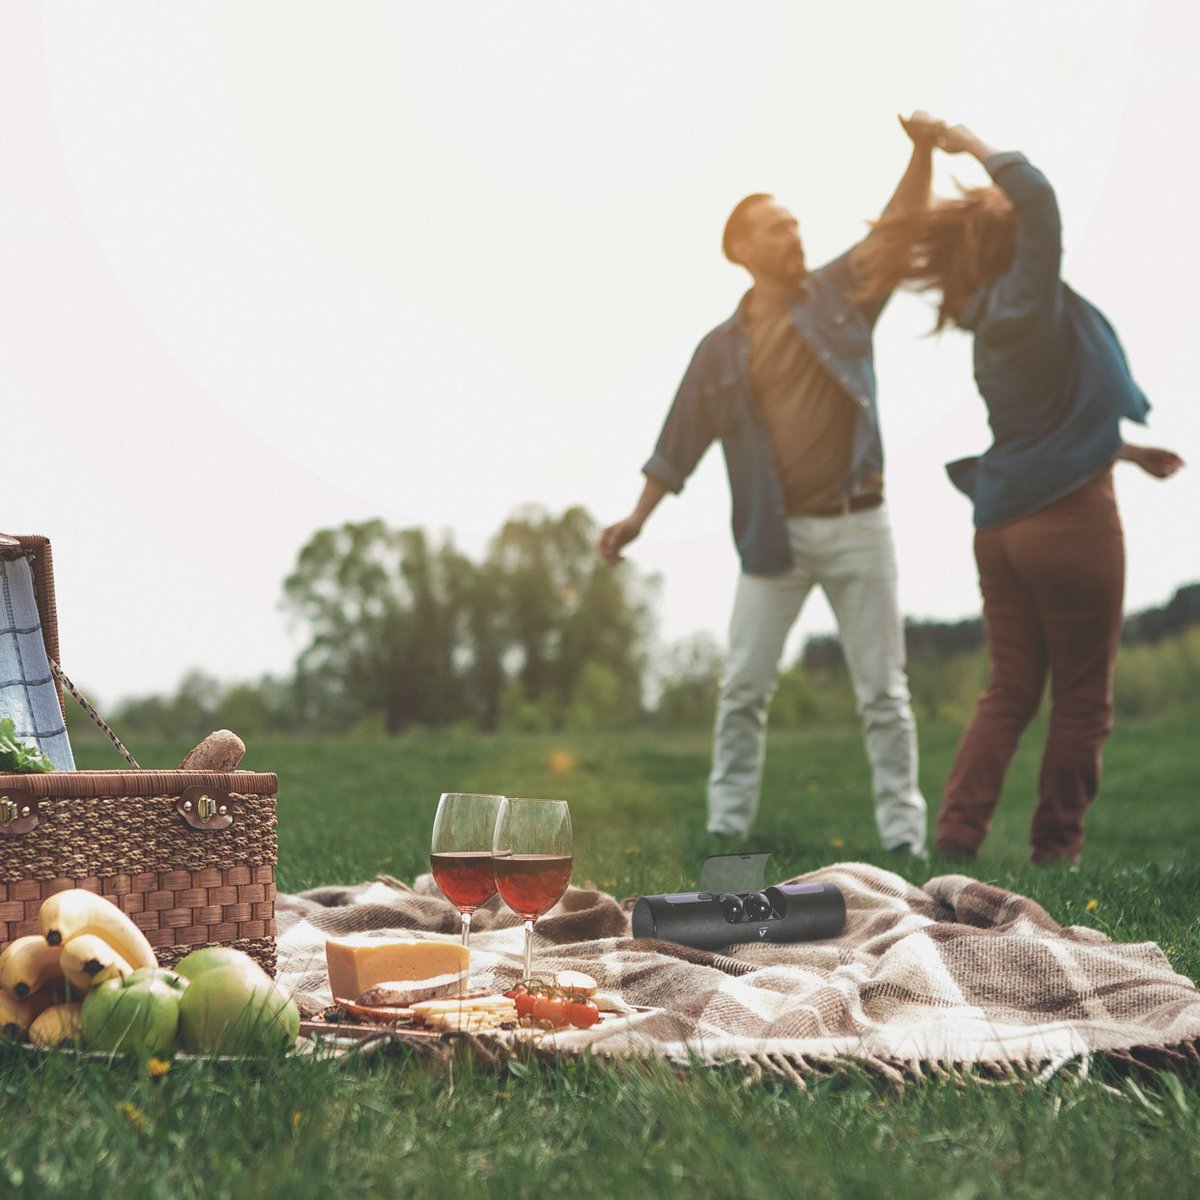 𝑴𝒖𝒔𝒊𝒄 𝒐𝒇 𝒎𝒚 𝒉𝒆𝒂𝒓𝒕! ❤

.
.
.

#Govision #Govisionusa #Music #musiconthego #dance #romaticgetaway #theloveofmylife #love #picnic #wine #relaxeddays #cheese #Earbuds #bluetooth #4hours #easypairing #speakersystem #green #nature #getaway #lovebycapsule #capsule #audio